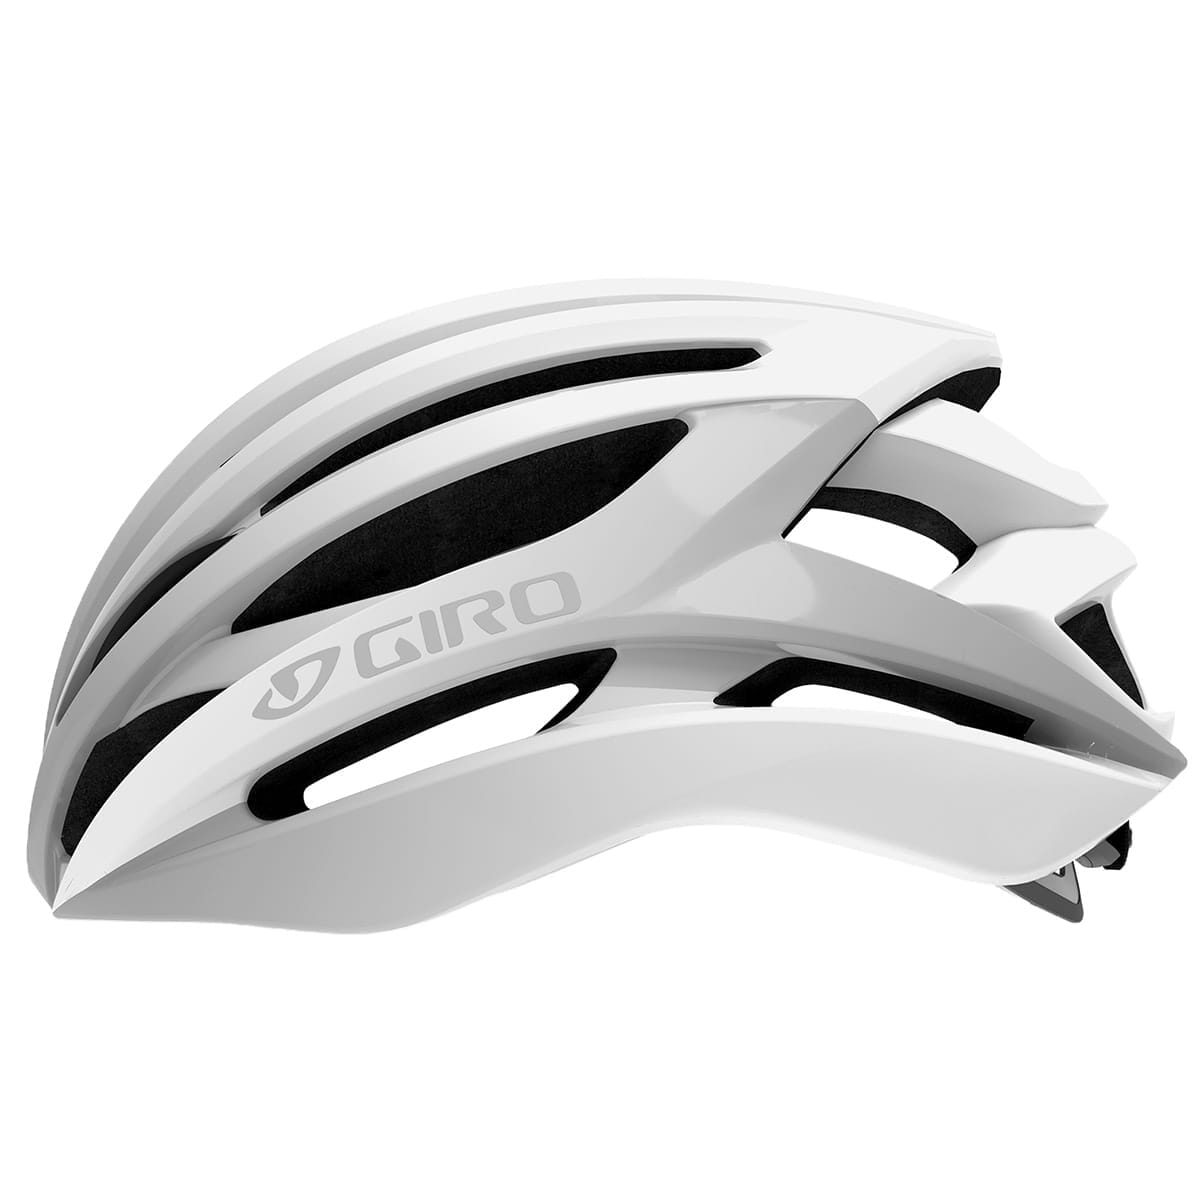 Casque Route GIRO SYNTAX Blanc/Argent